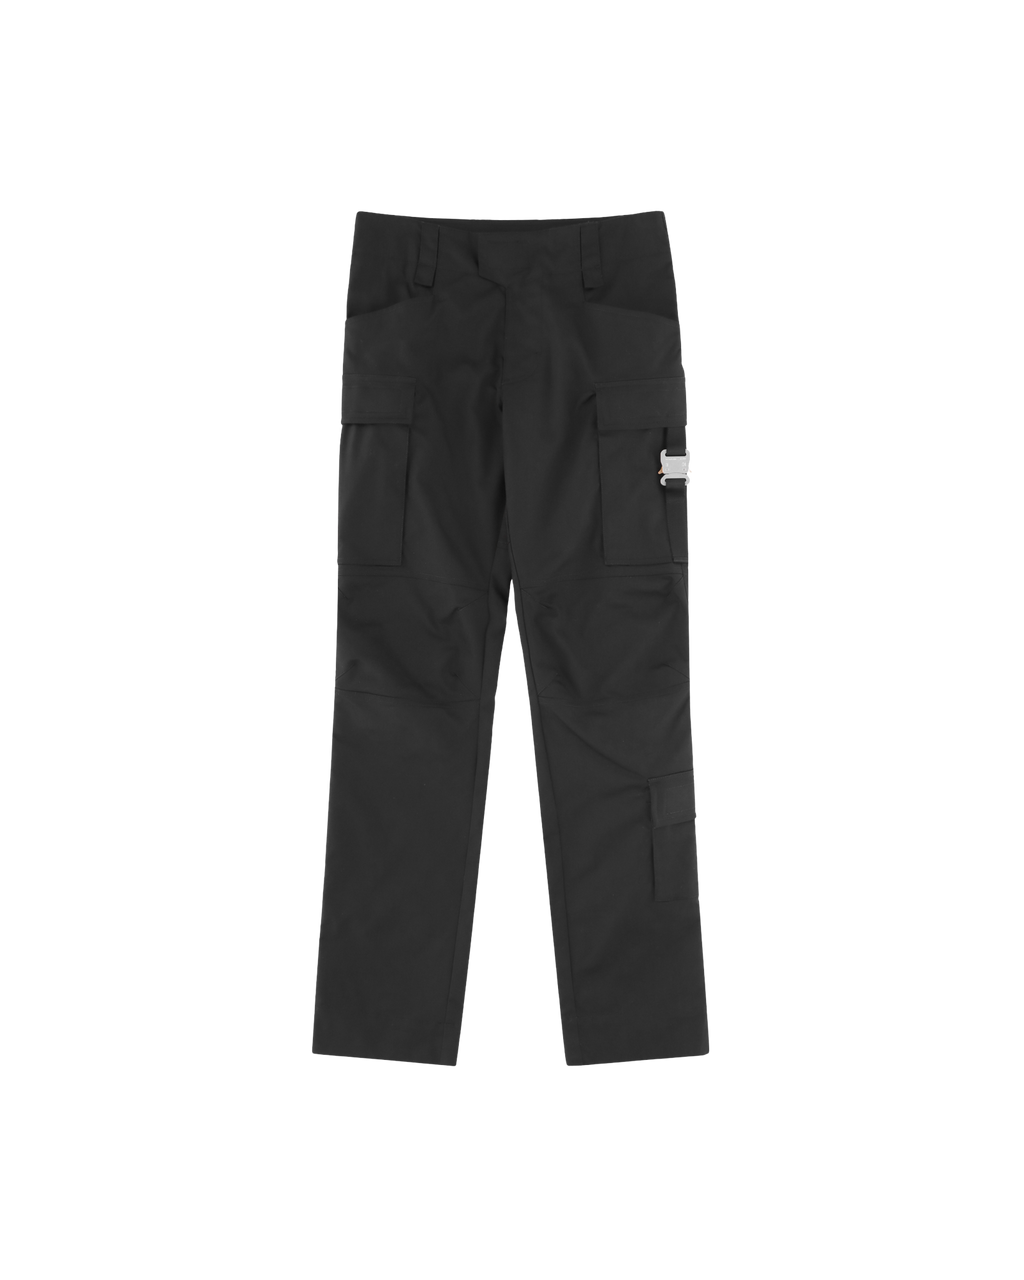 BUCKLE TACTICAL PANT